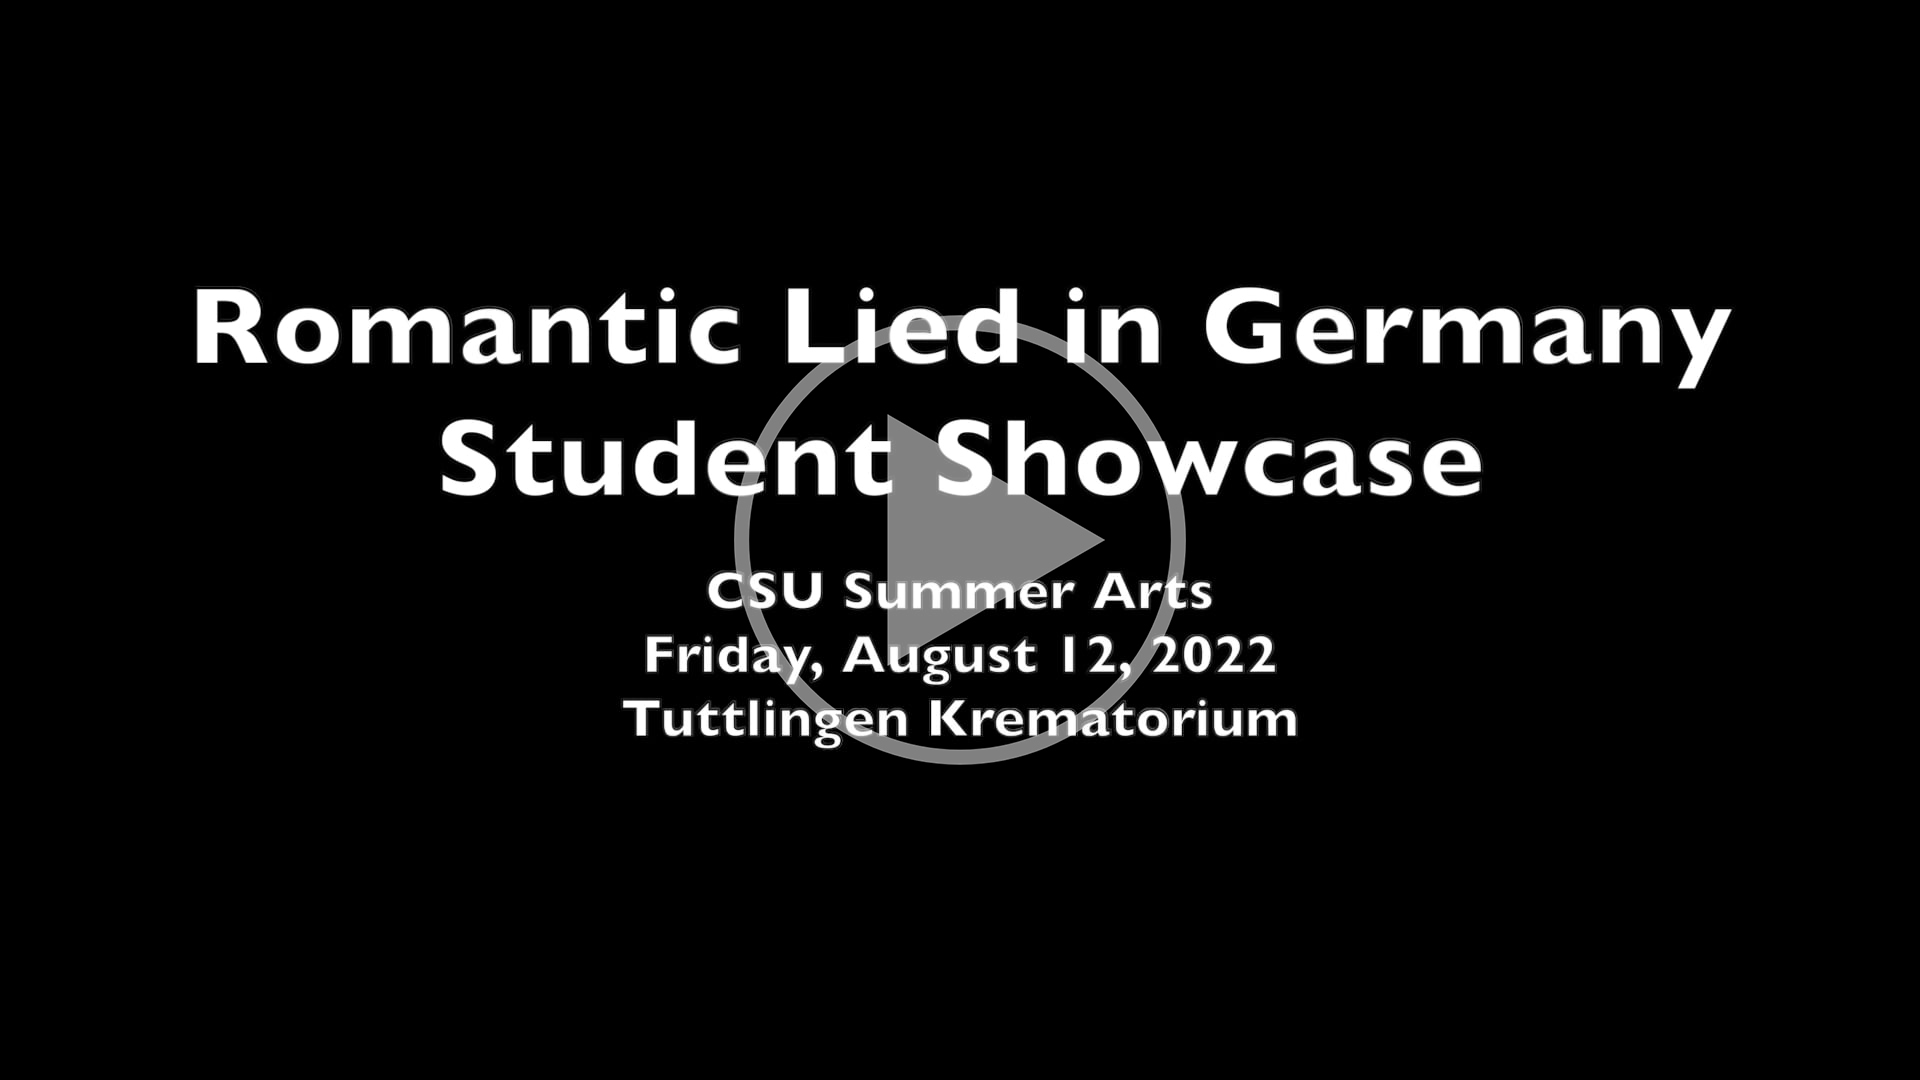 Play the 'Romantic Lied in Germany Student Showcase'